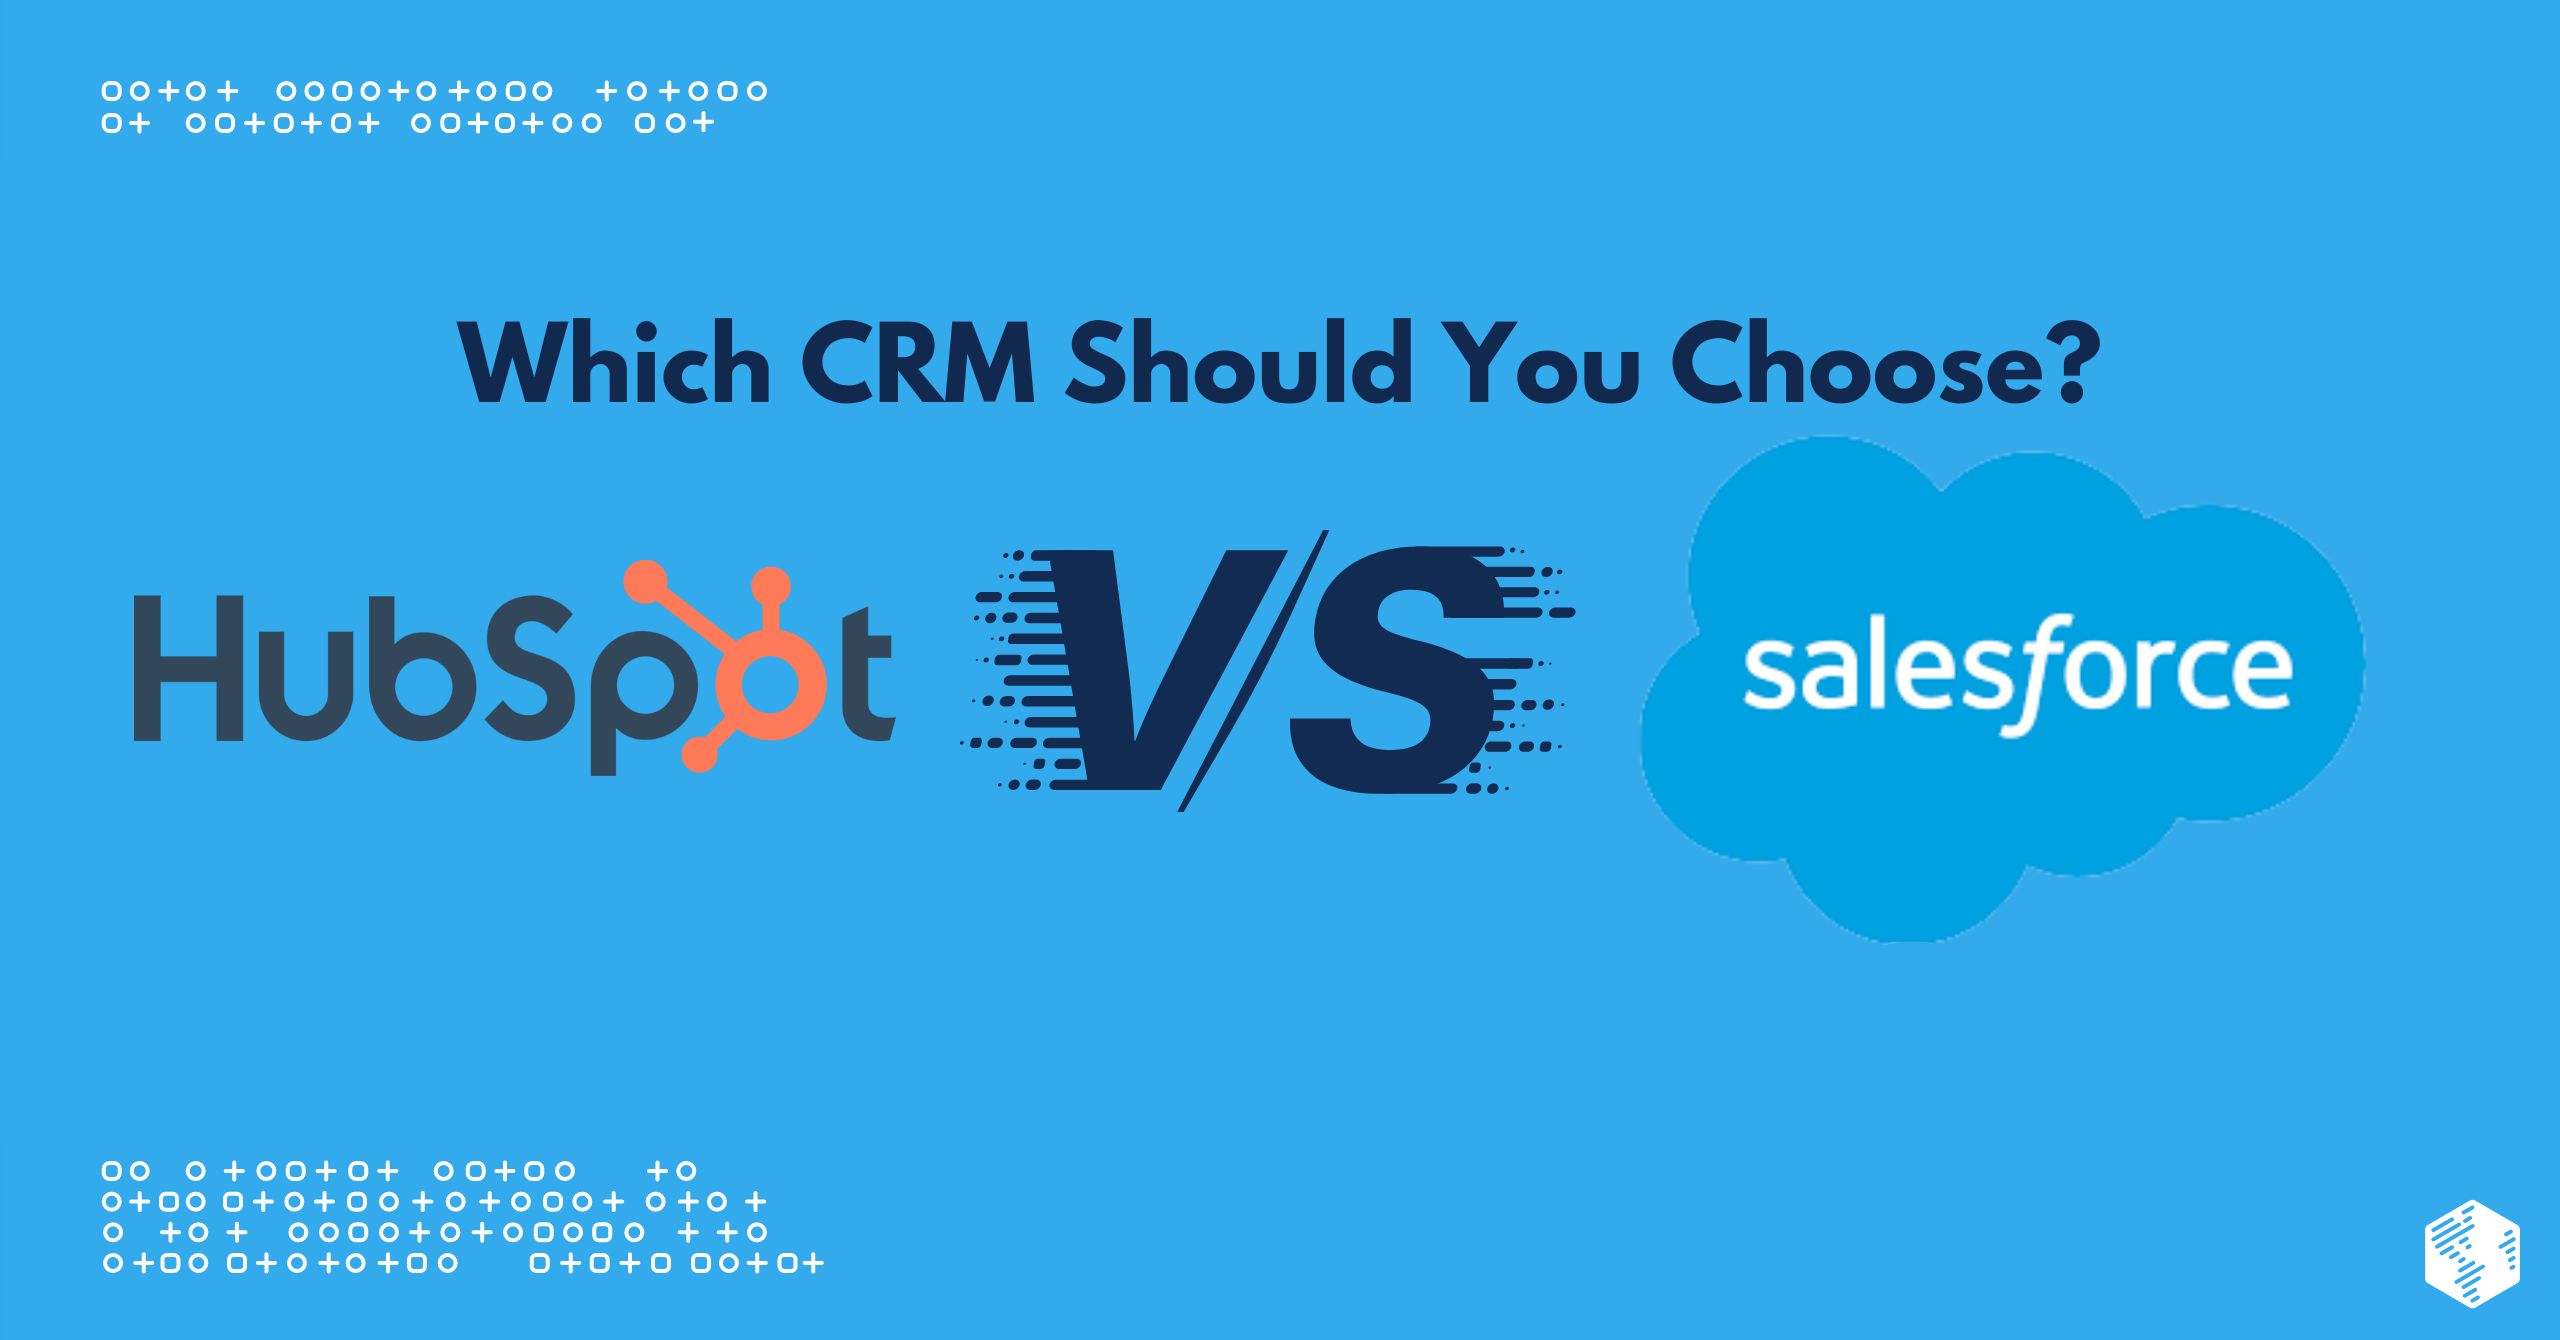 HubSpot vs. Salesforce: Which CRM Should You Choose?